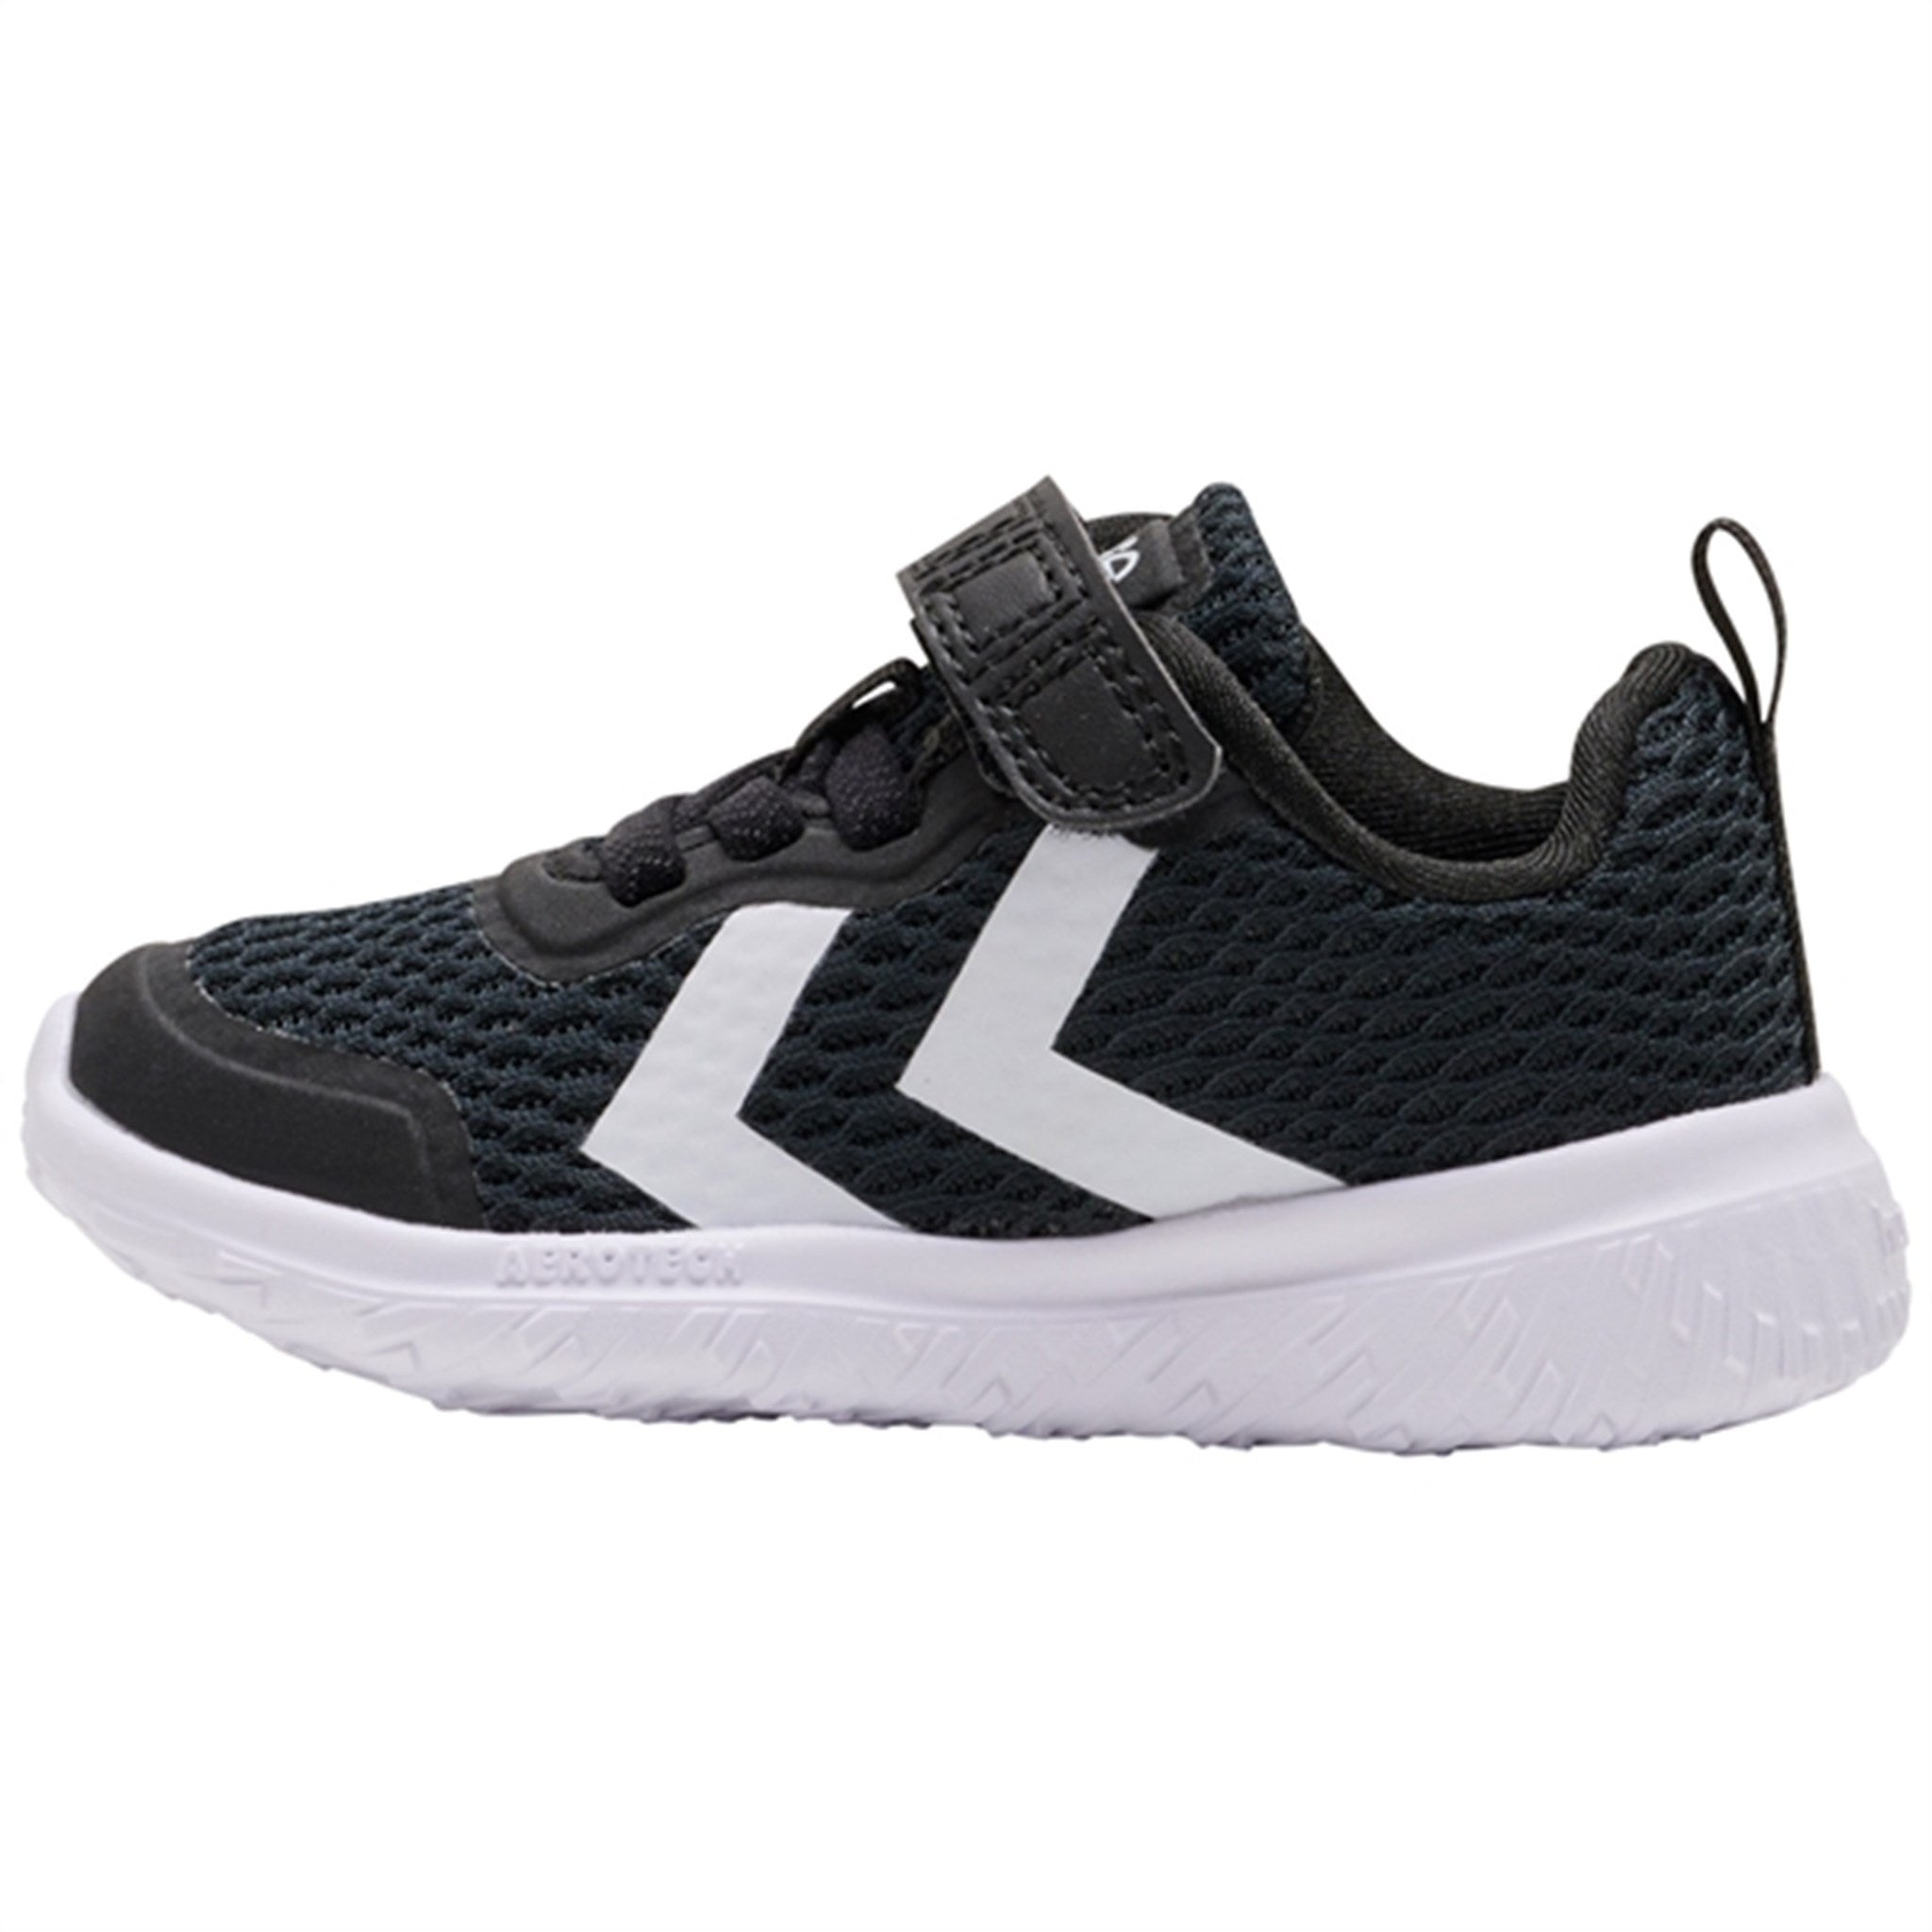 Hummel Black Actus Recycled INF Sneakers